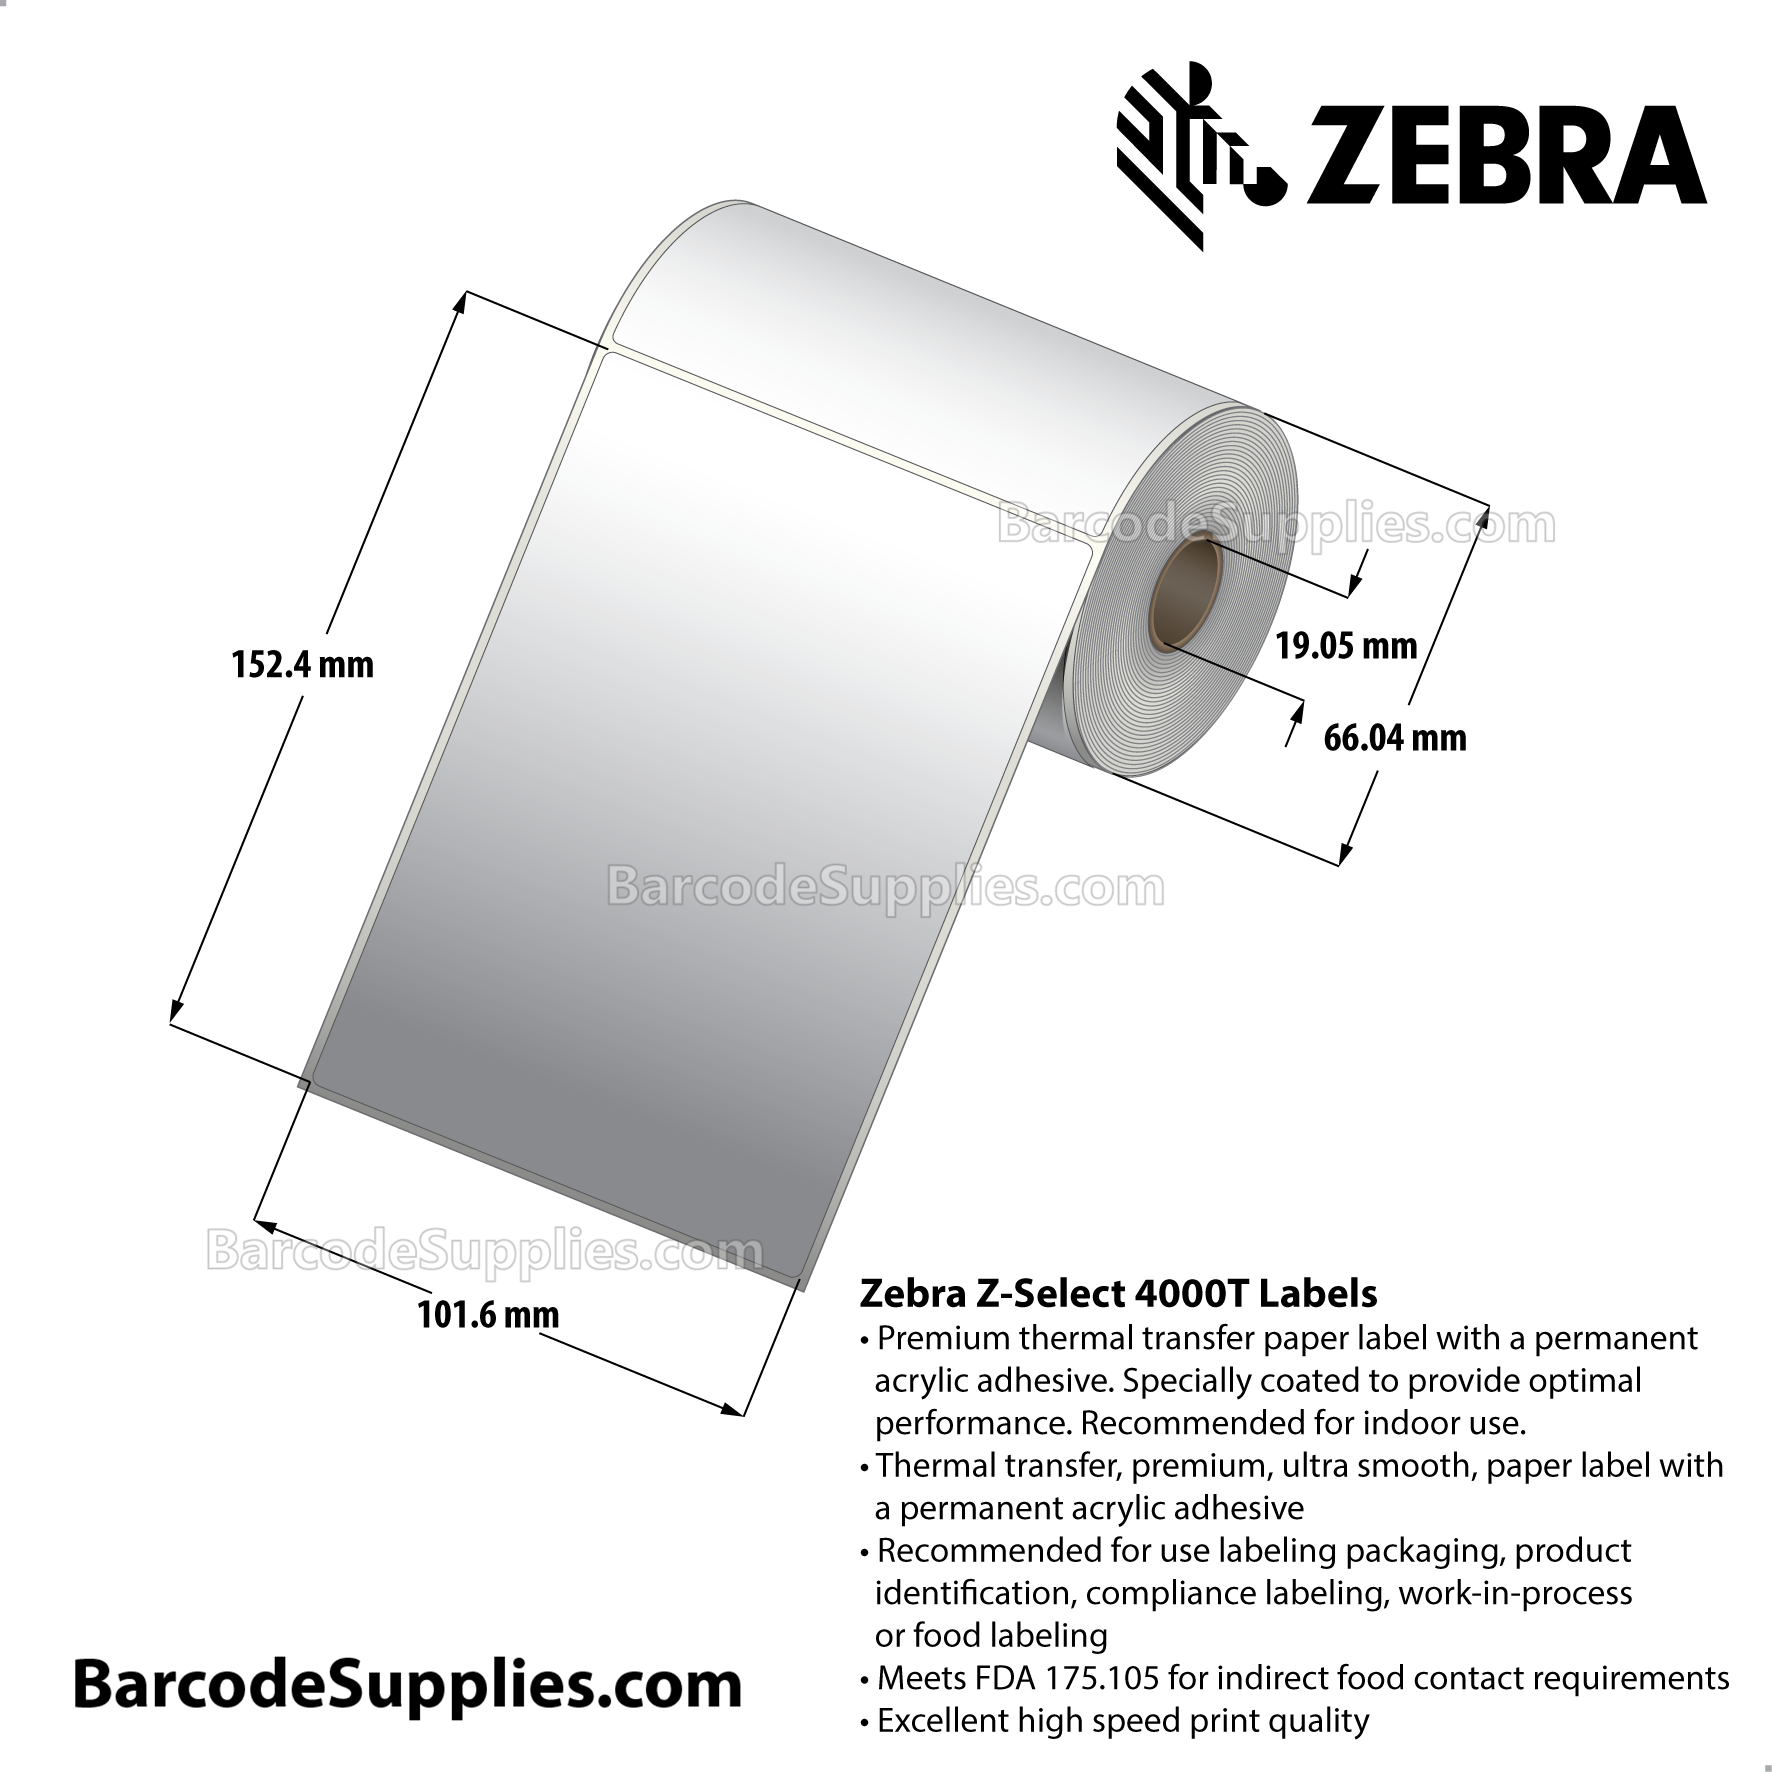 4 x 6 Thermal Transfer White Z-Select 4000T Labels With Permanent Adhesive - Not Perforated - 110 Labels Per Roll - Carton Of 16 Rolls - 1760 Labels Total - MPN: 10008549